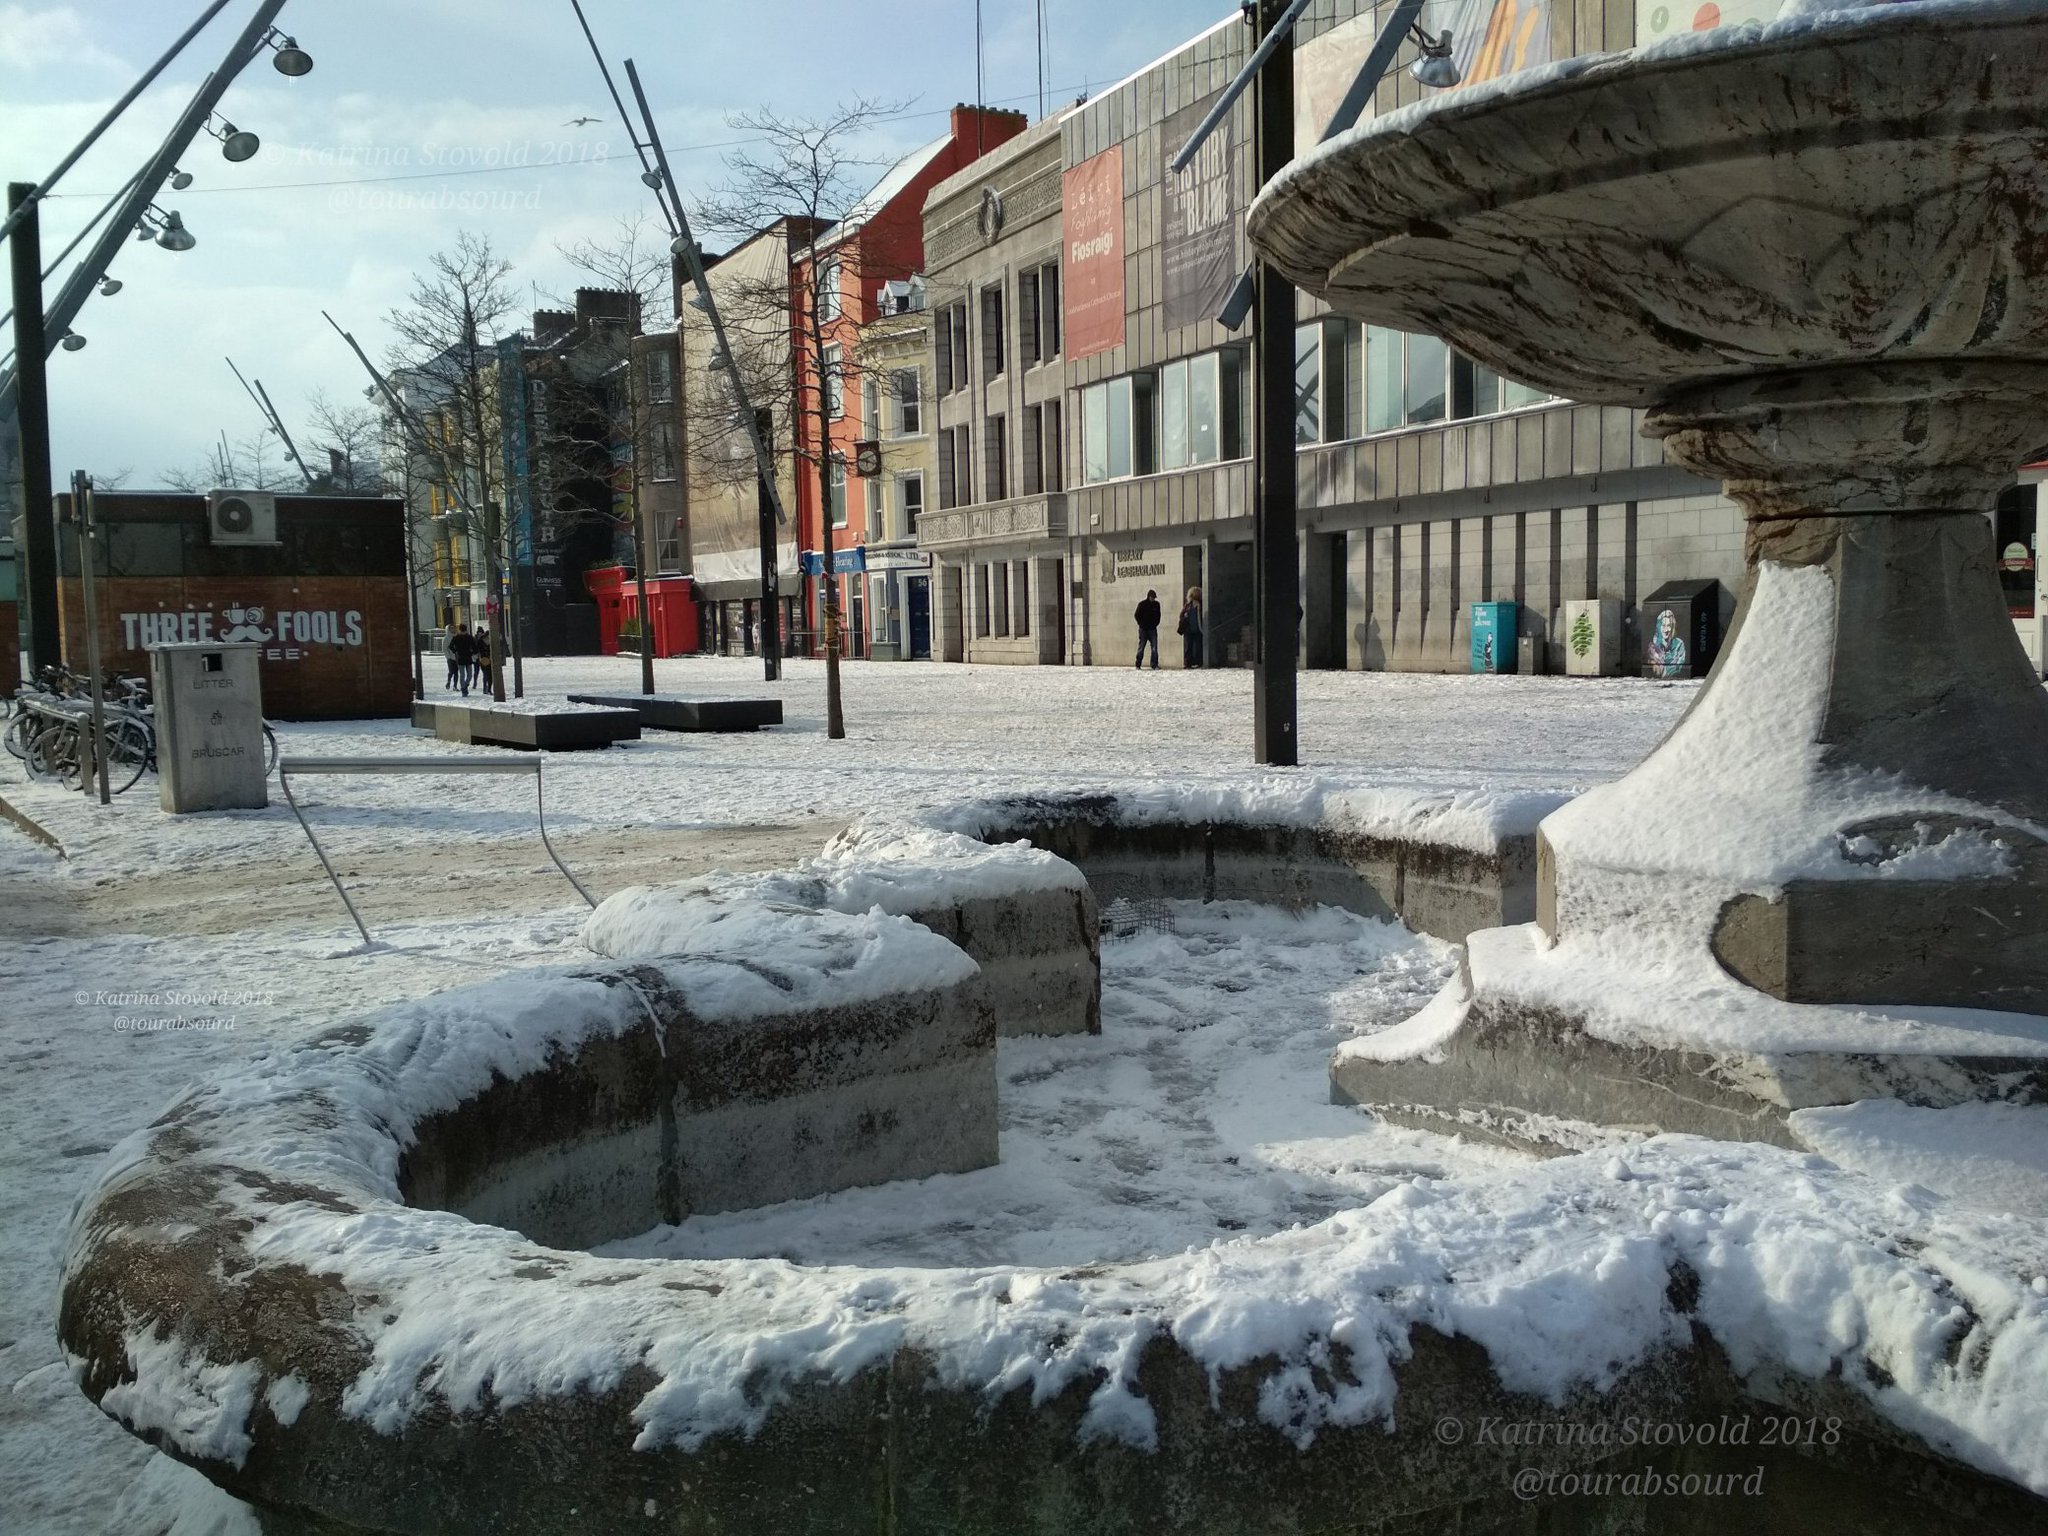 A fountain on Grand Parade street in Cork, Ireland, with snow on the ground and the edges of the fountain.